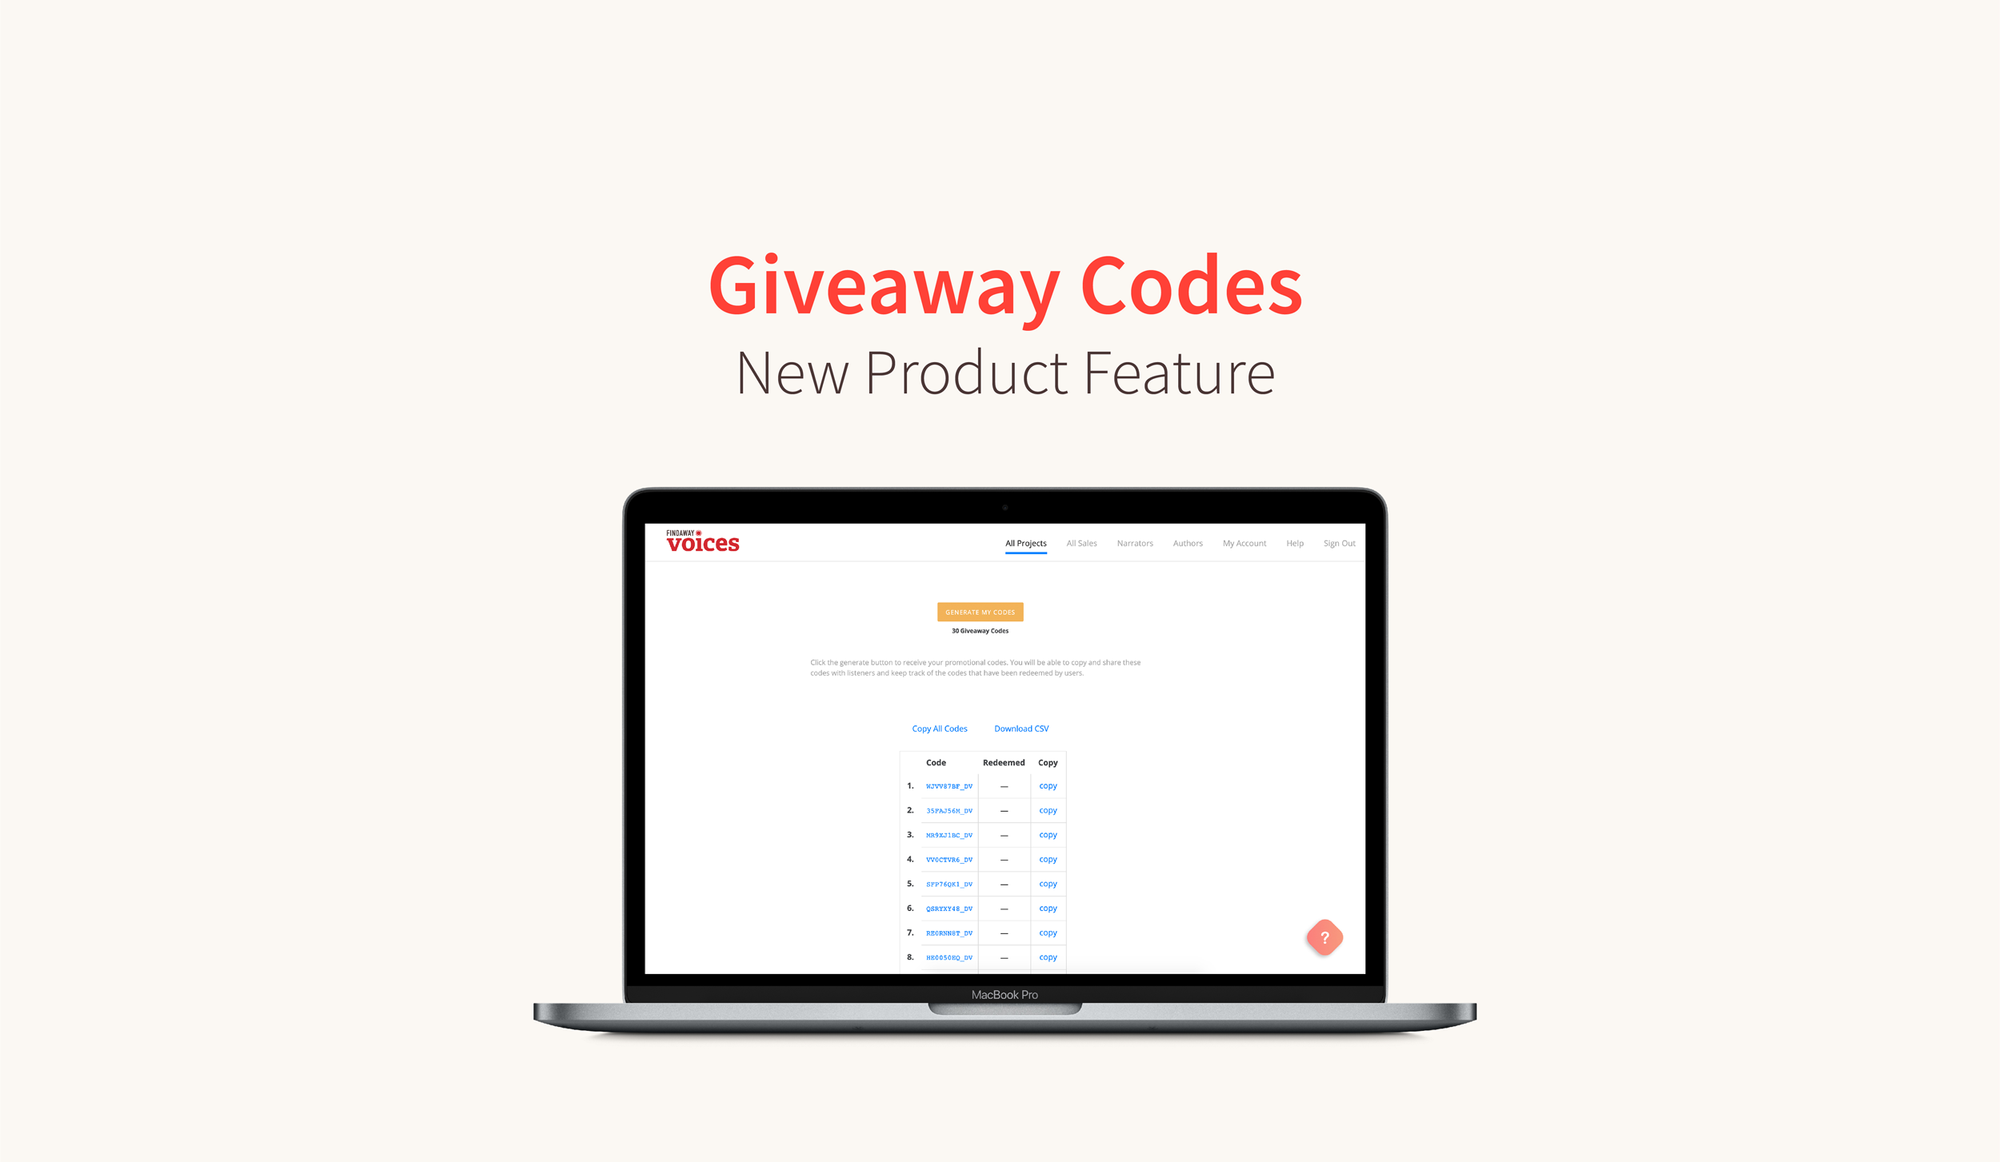 Feature Update: Instantly Generate Giveaway Codes